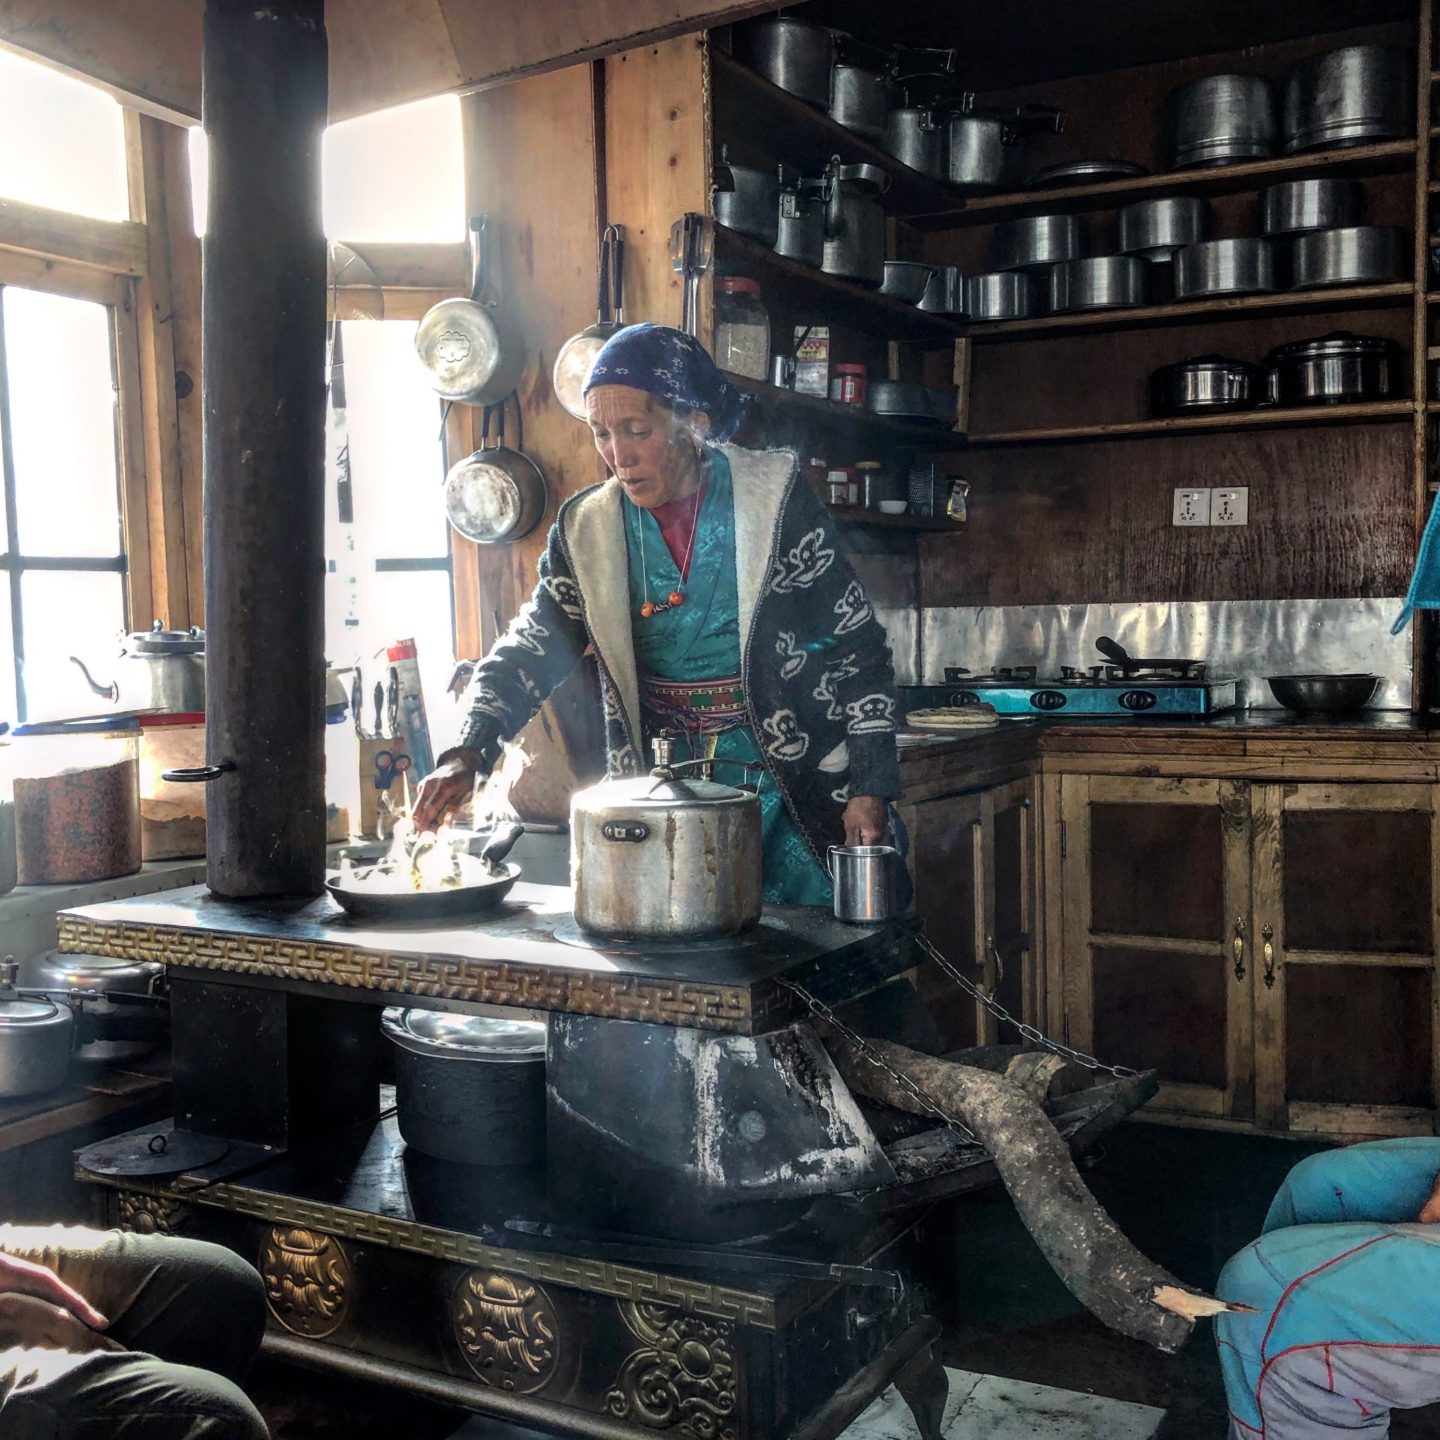 Langtang. In the kitchen.